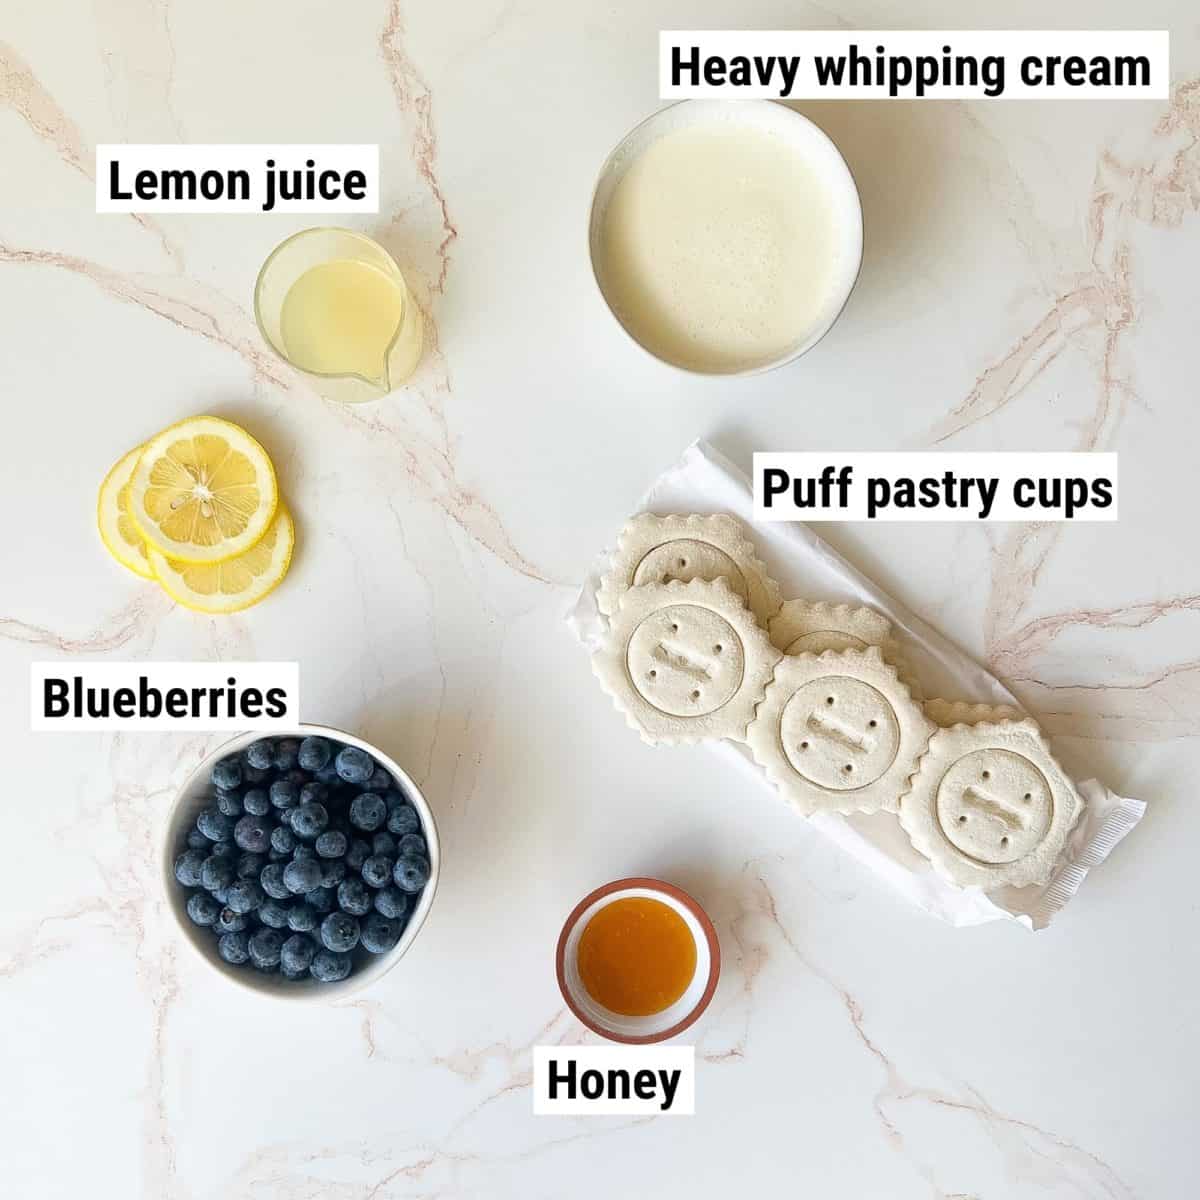 The recipe ingredients used to make puff pastry cups spread out on a table.